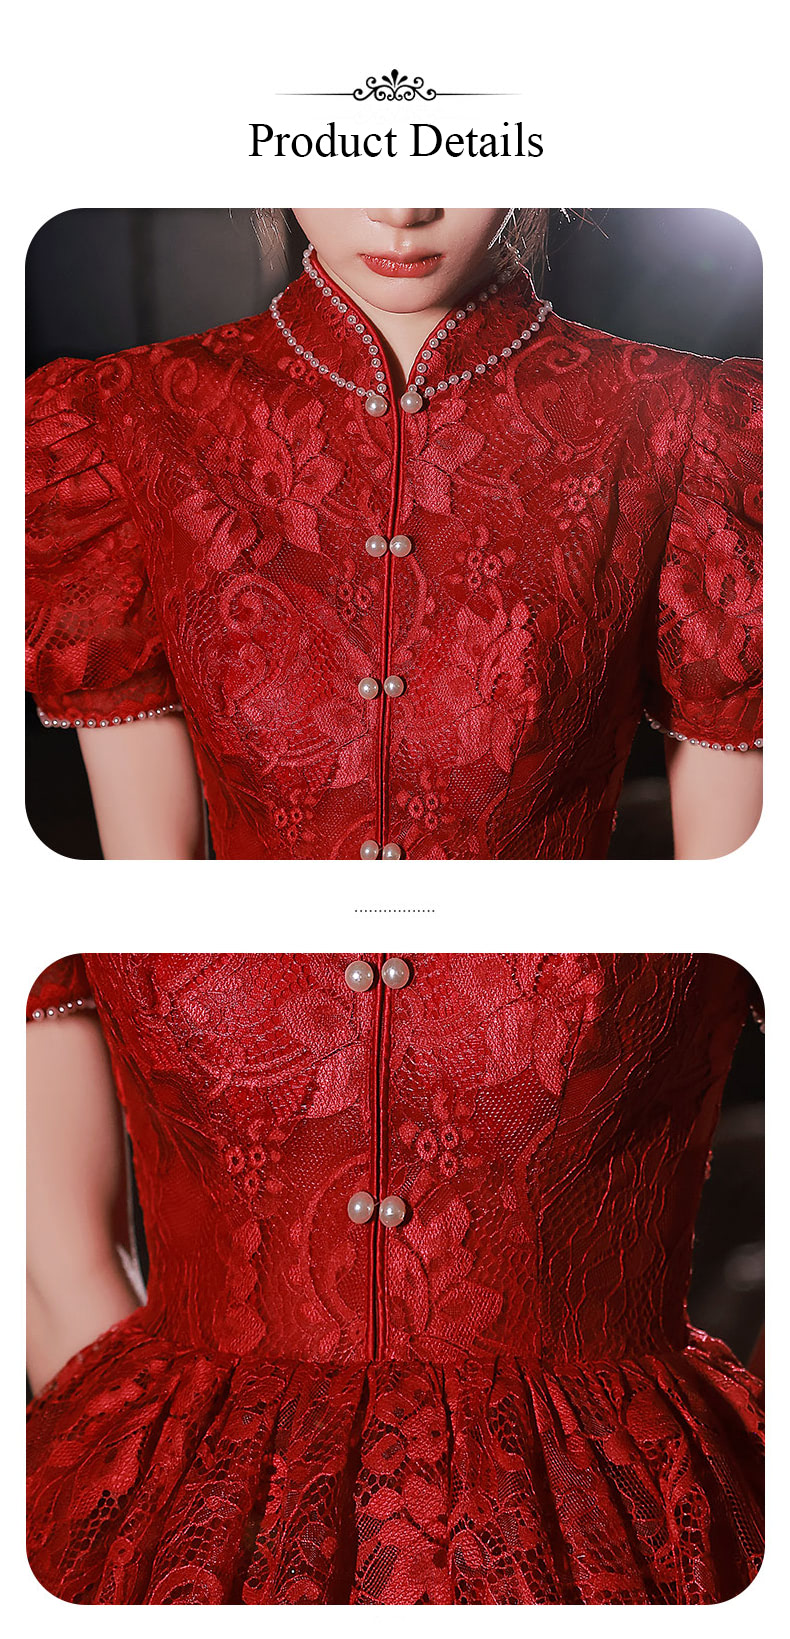 Aesthetic-Embroidered-Red-Prom-Dress-for-Wedding-Banquet-Party11.jpg